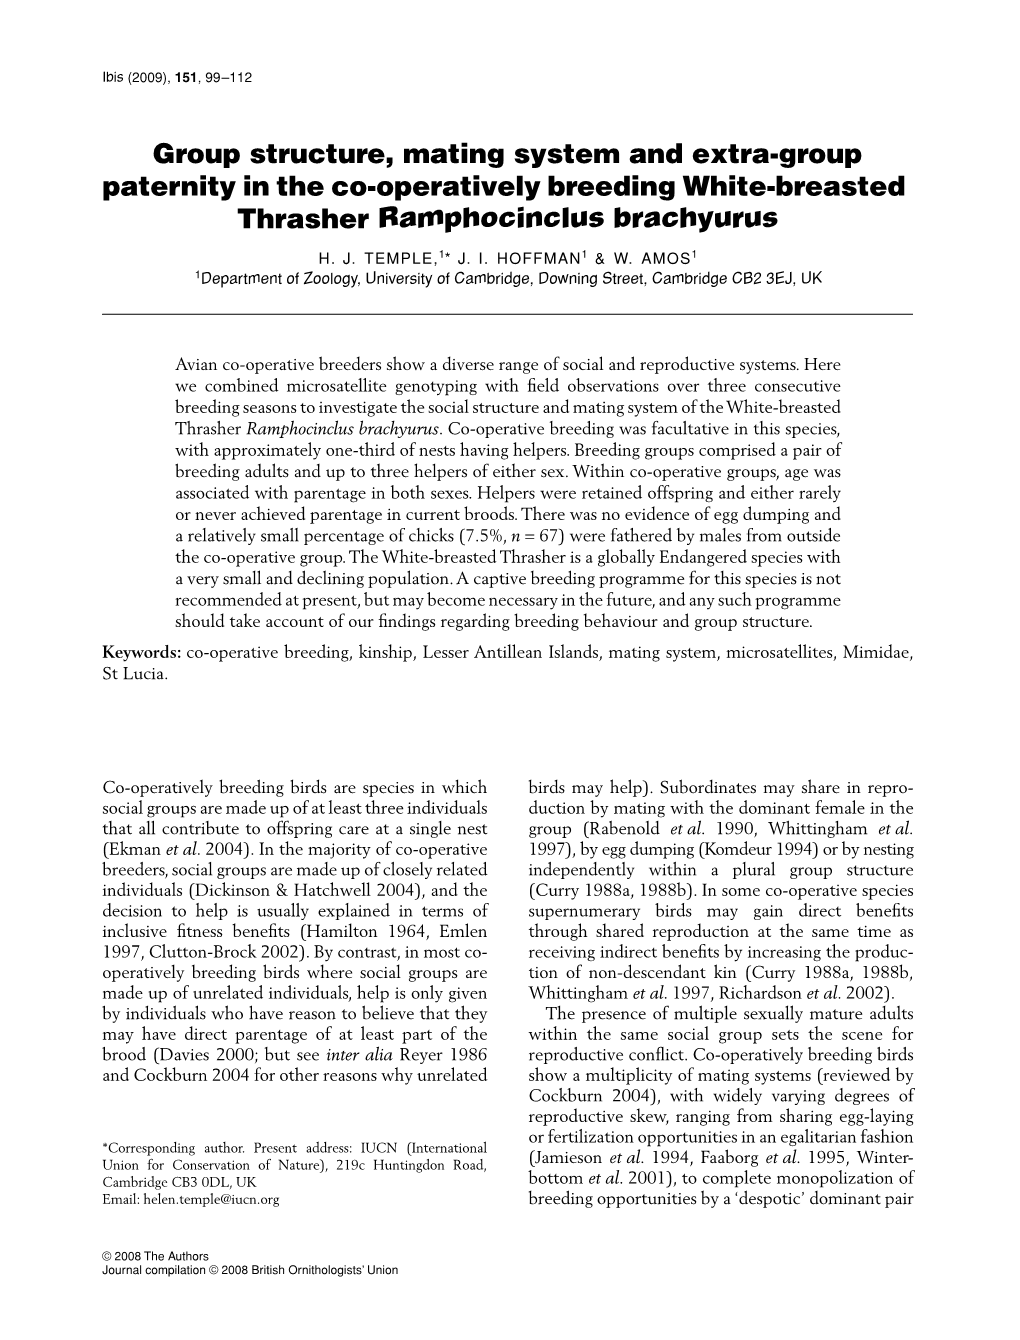 Group Structure, Mating System and Extra-Group Paternity in the Co-Operatively Breeding White-Breasted Thrasher Ramphocinclus Brachyurus